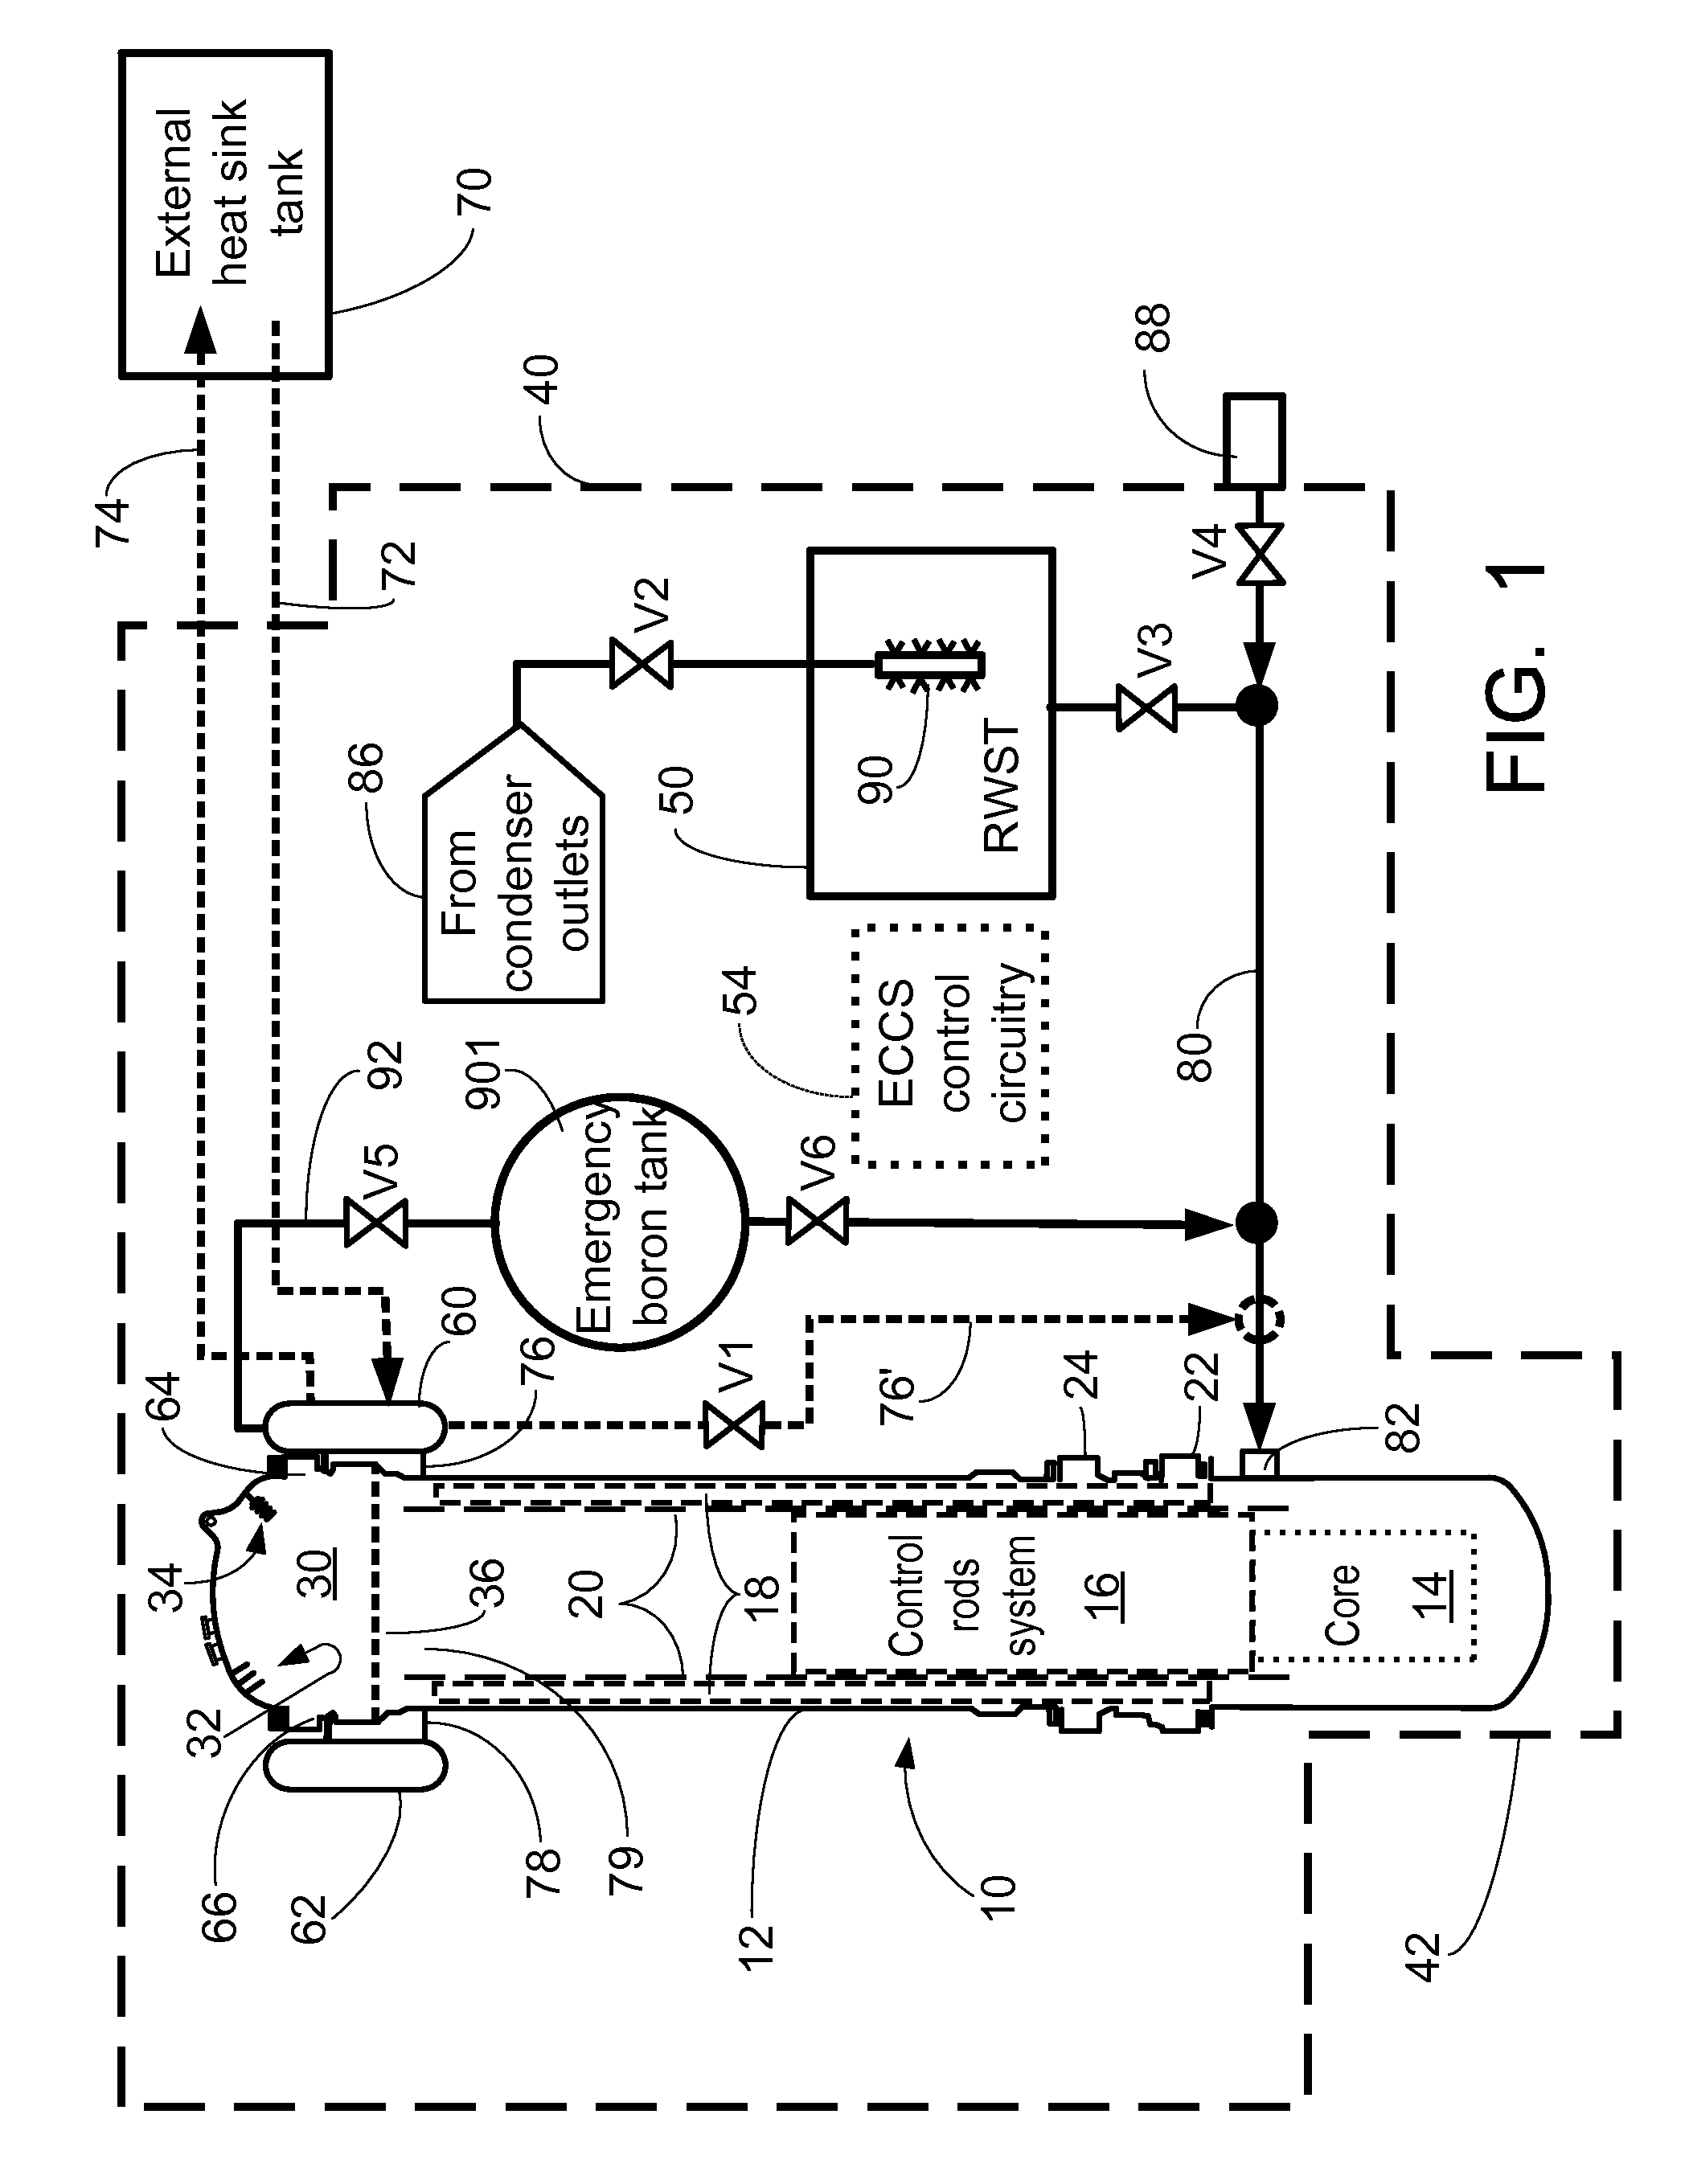 Integrated emergency core cooling system condenser for pressurized water reactor